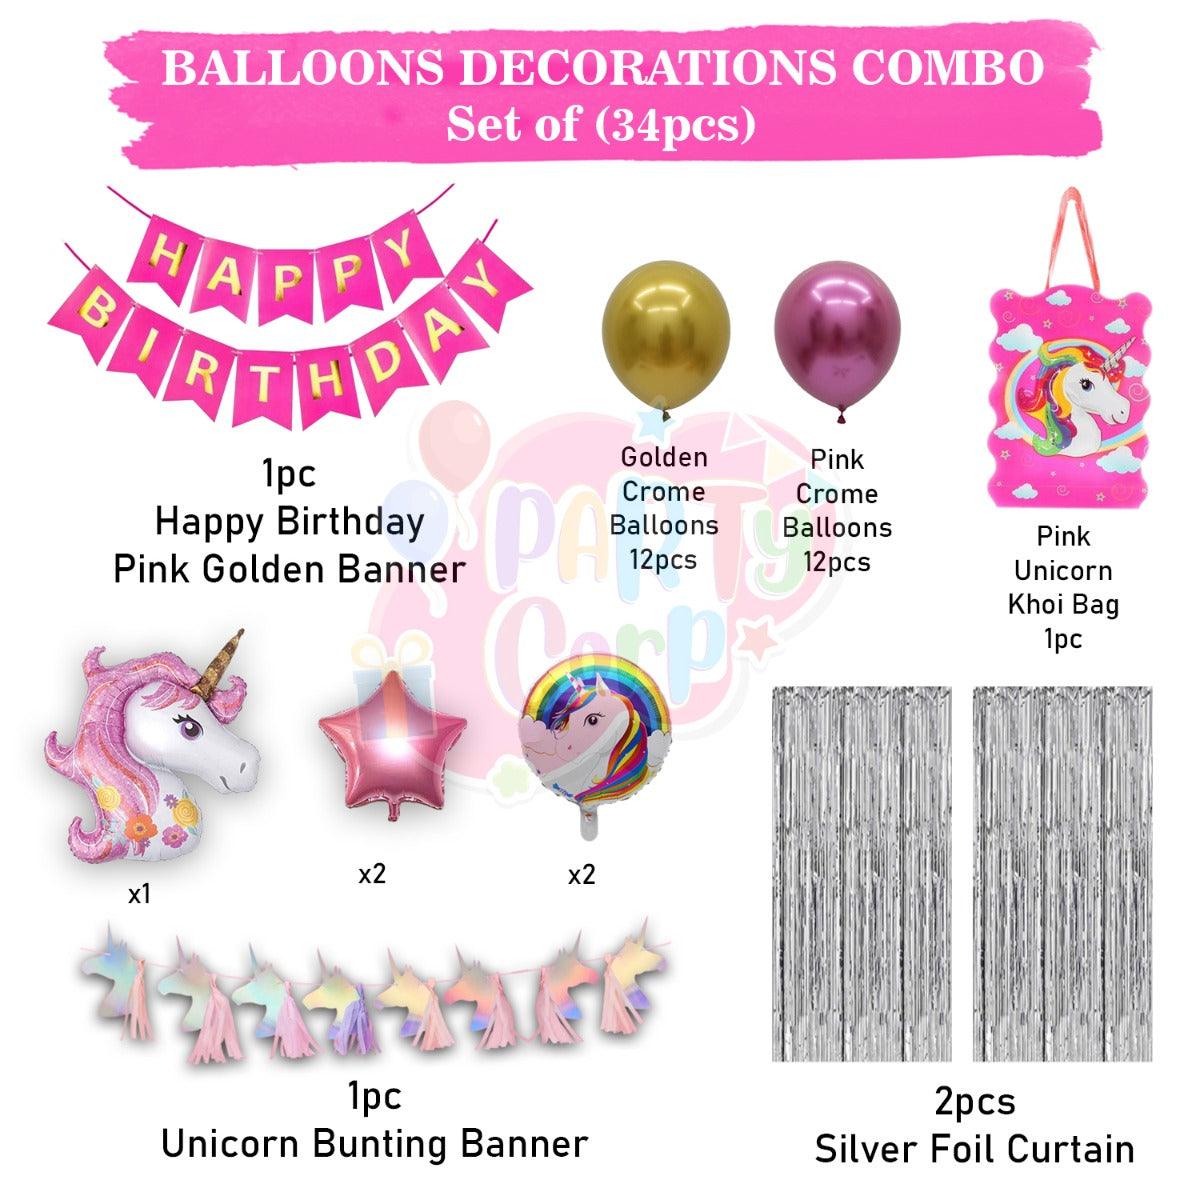 PartyCorp Happy Birthday Decoration Kit Combo 35 Pcs - Pink & Gold Chrome Balloons, Pink & Gold Happy Birthday Banner, Silver Curtain, Unicorn Theme Balloon Bouquet, Khoi Bag,Bunting Banner